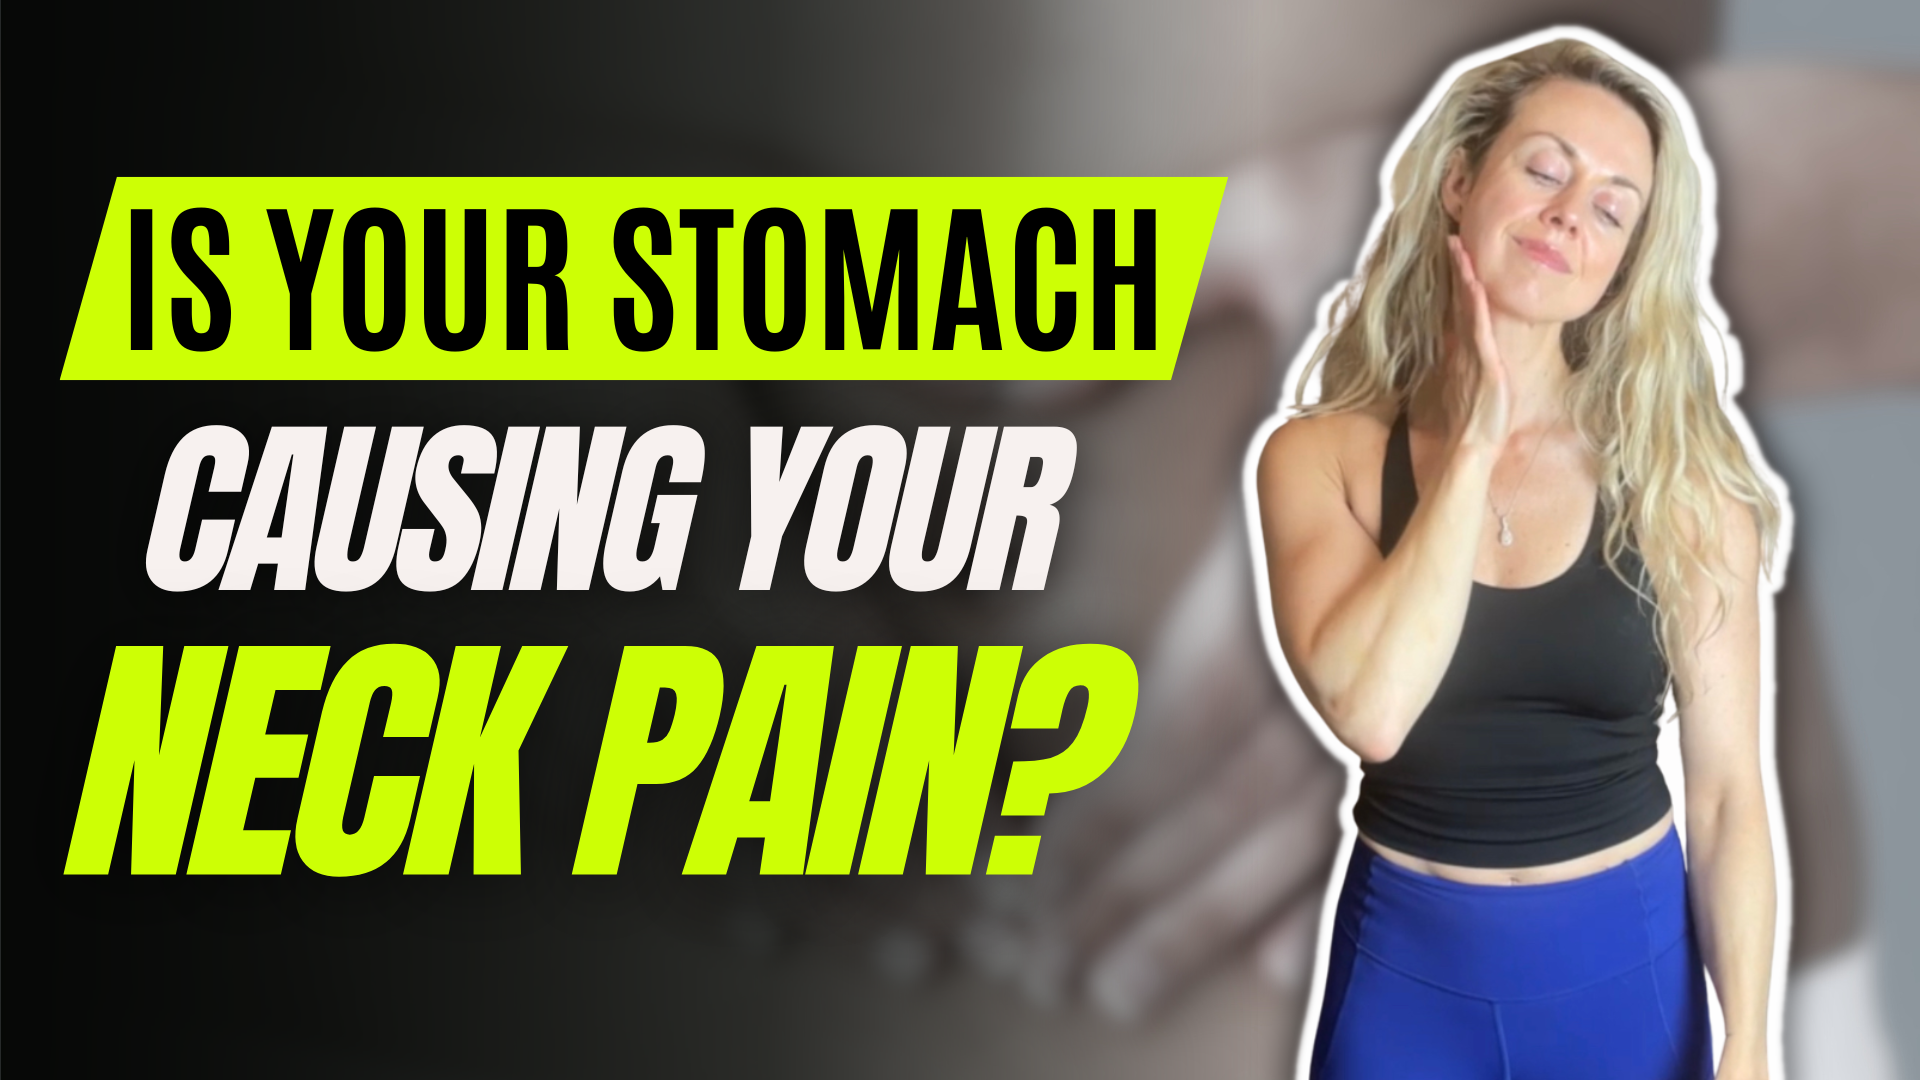 Is your stomach causing your left side neck pain?